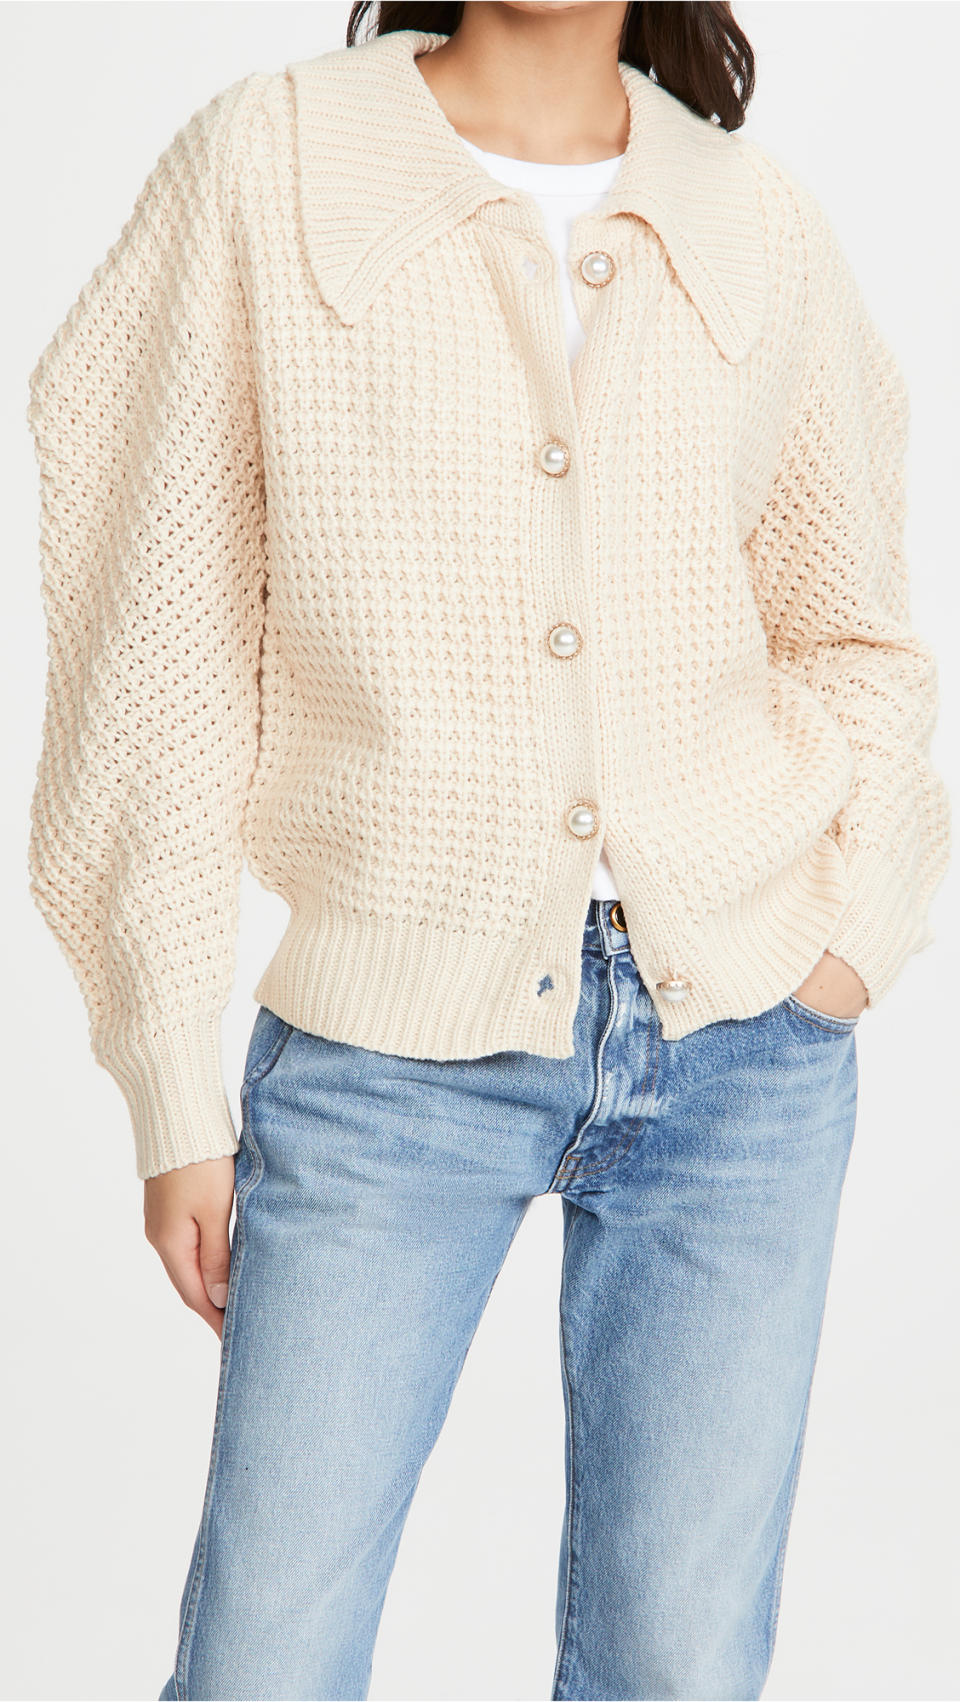 Moon River Collared Puff Sleeve Sweater. Image via Shopbop.